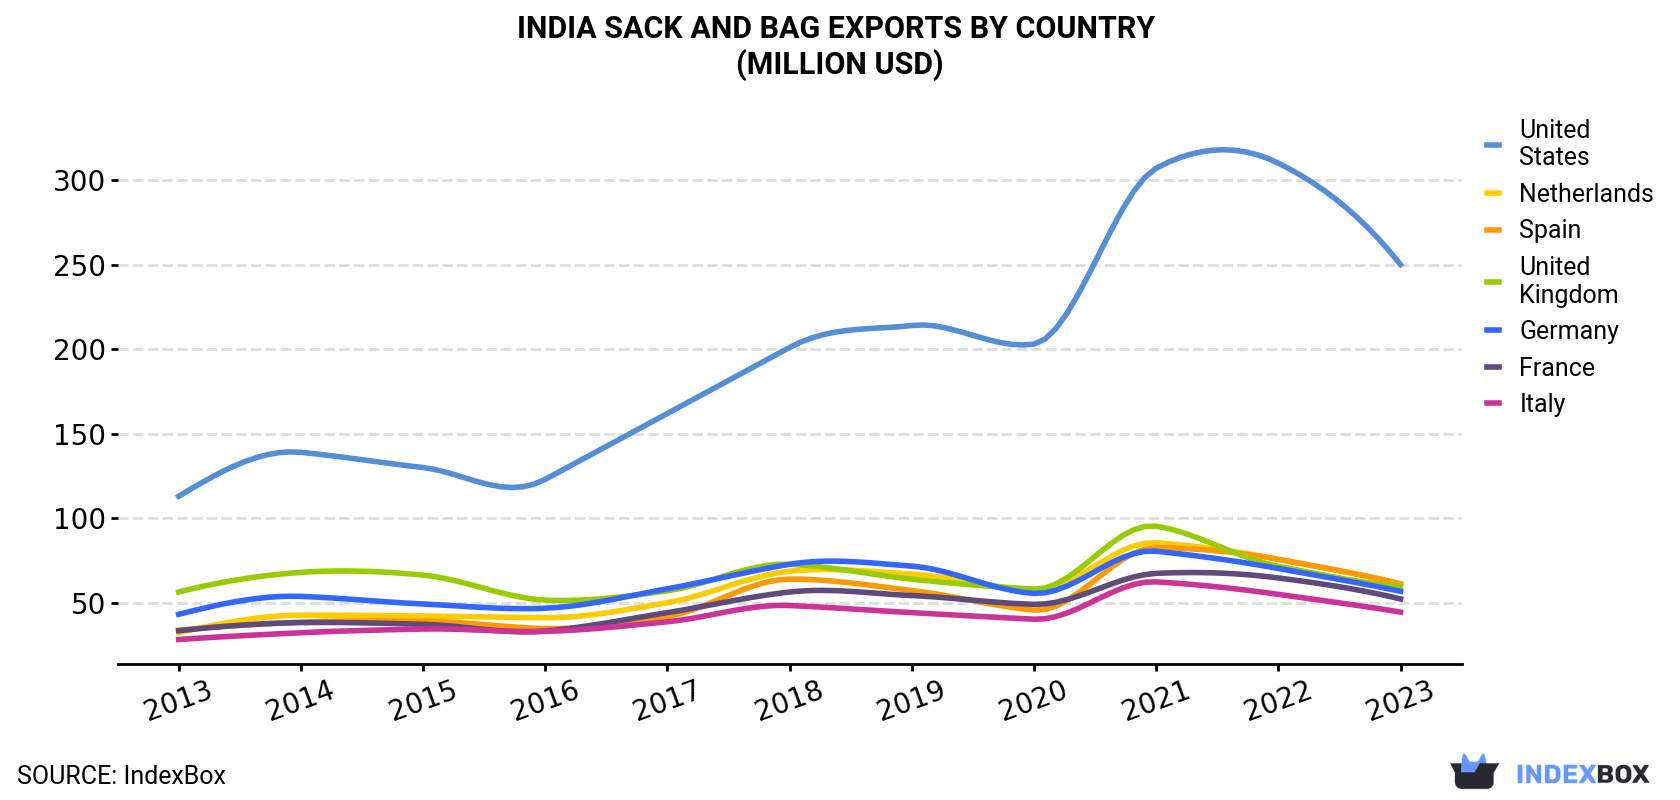 India Sack And Bag Exports By Country (Million USD)